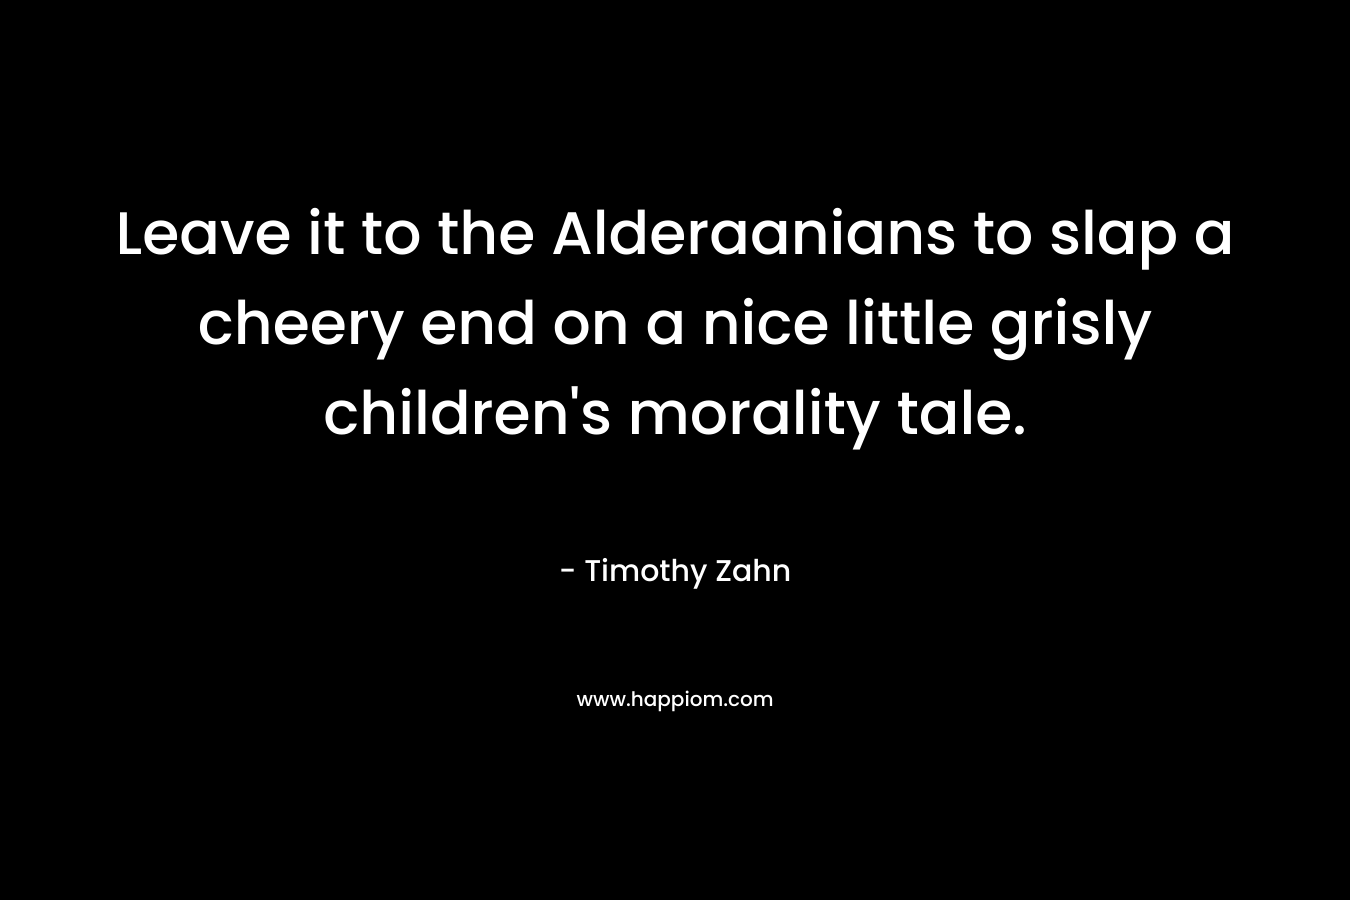 Leave it to the Alderaanians to slap a cheery end on a nice little grisly children’s morality tale. – Timothy Zahn